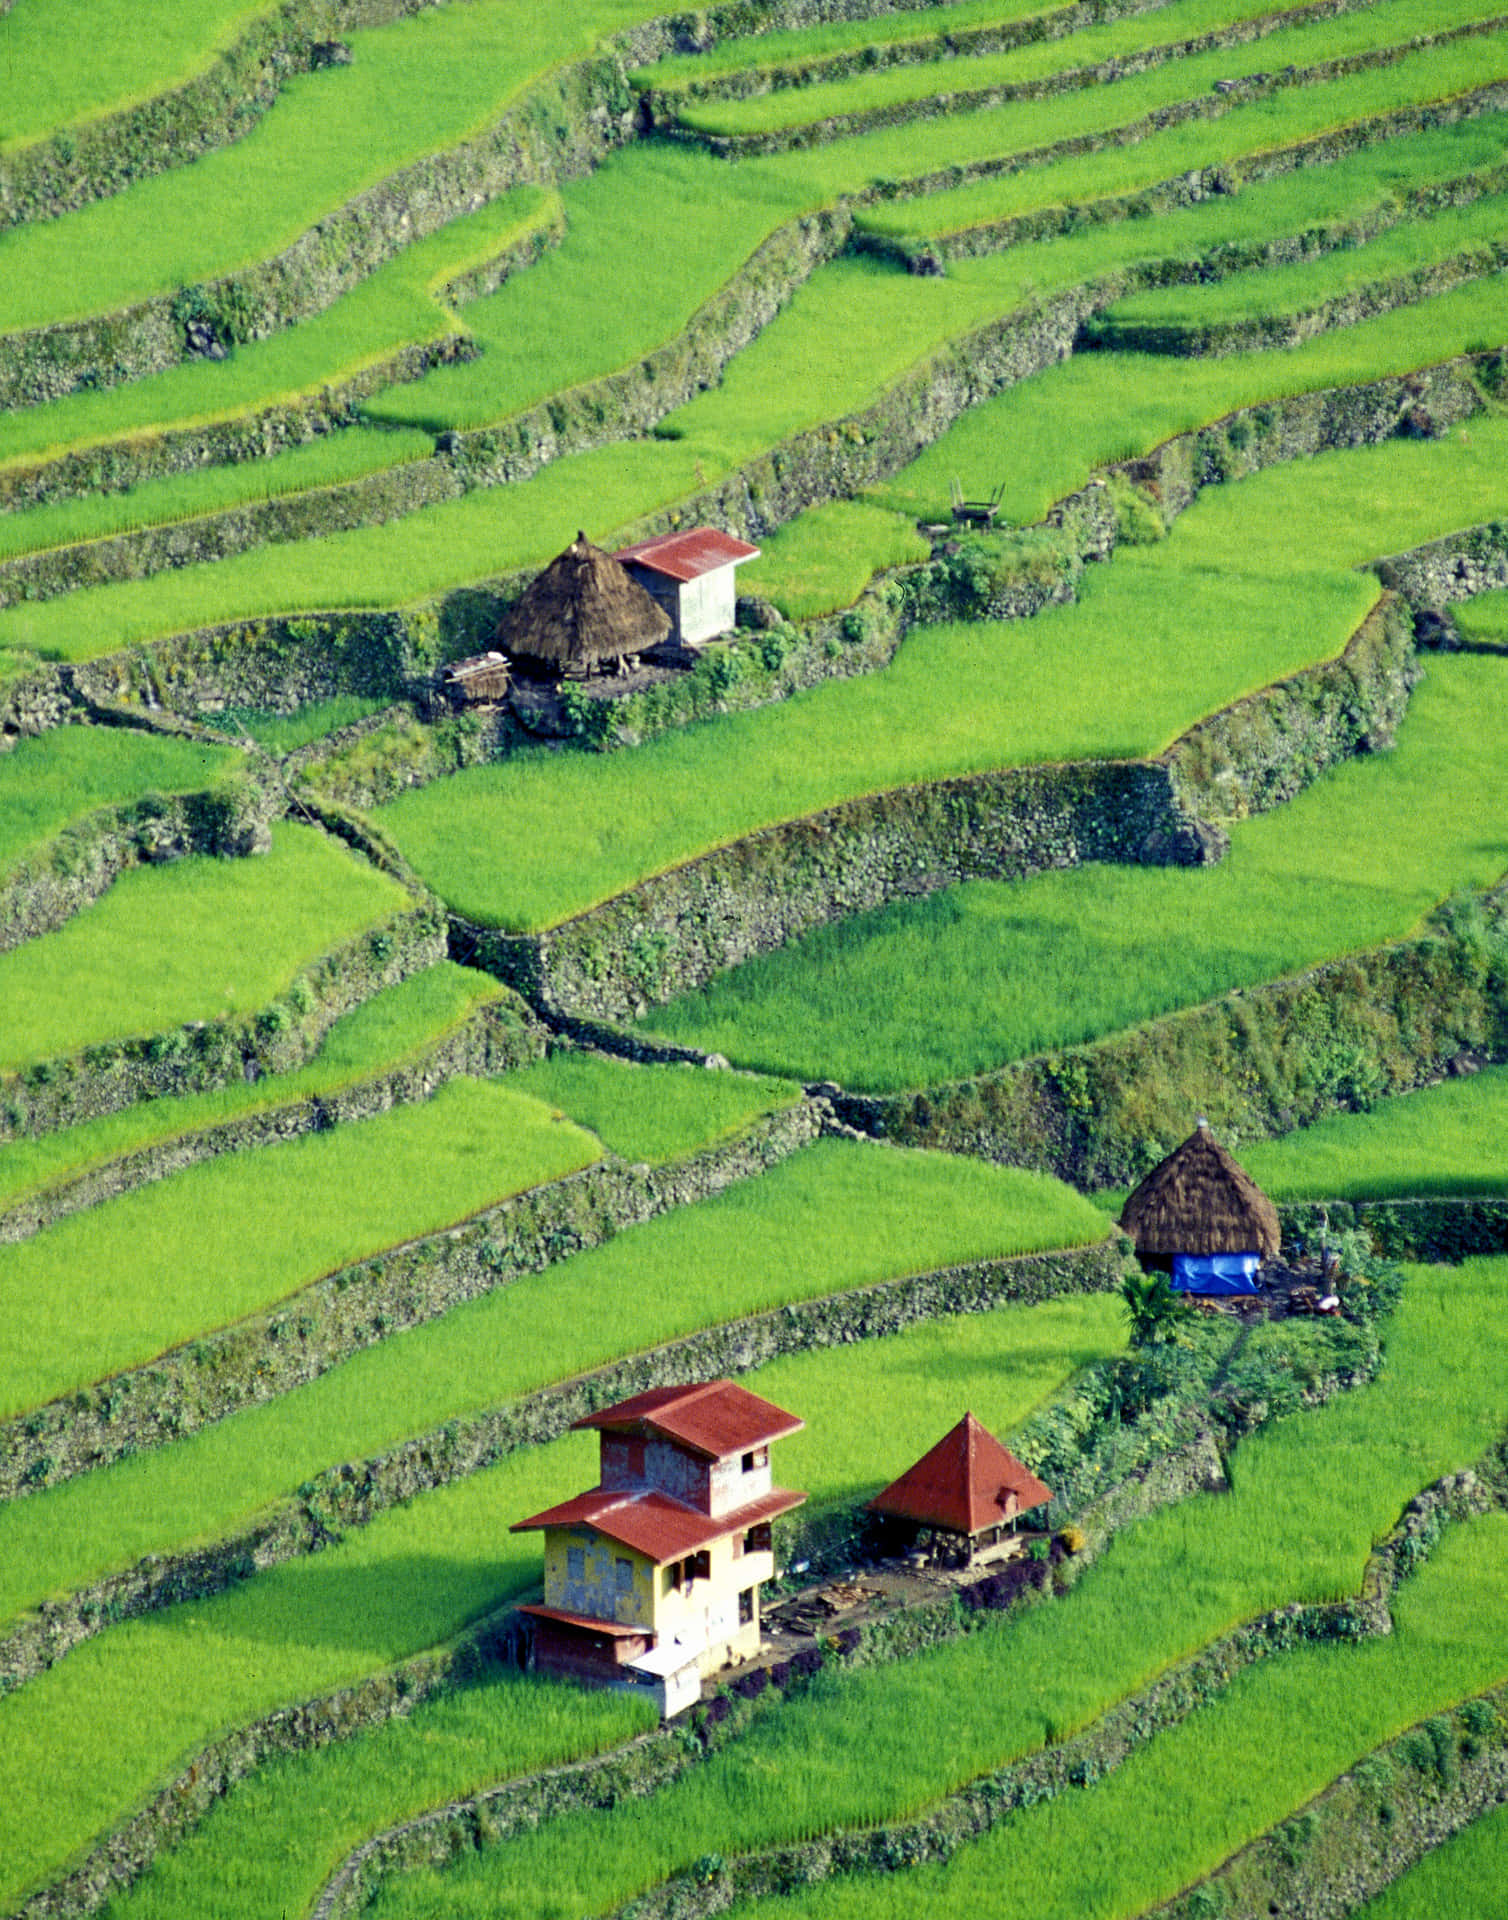 Homes In Banaue Rice Terraces In The Philippines Wallpaper